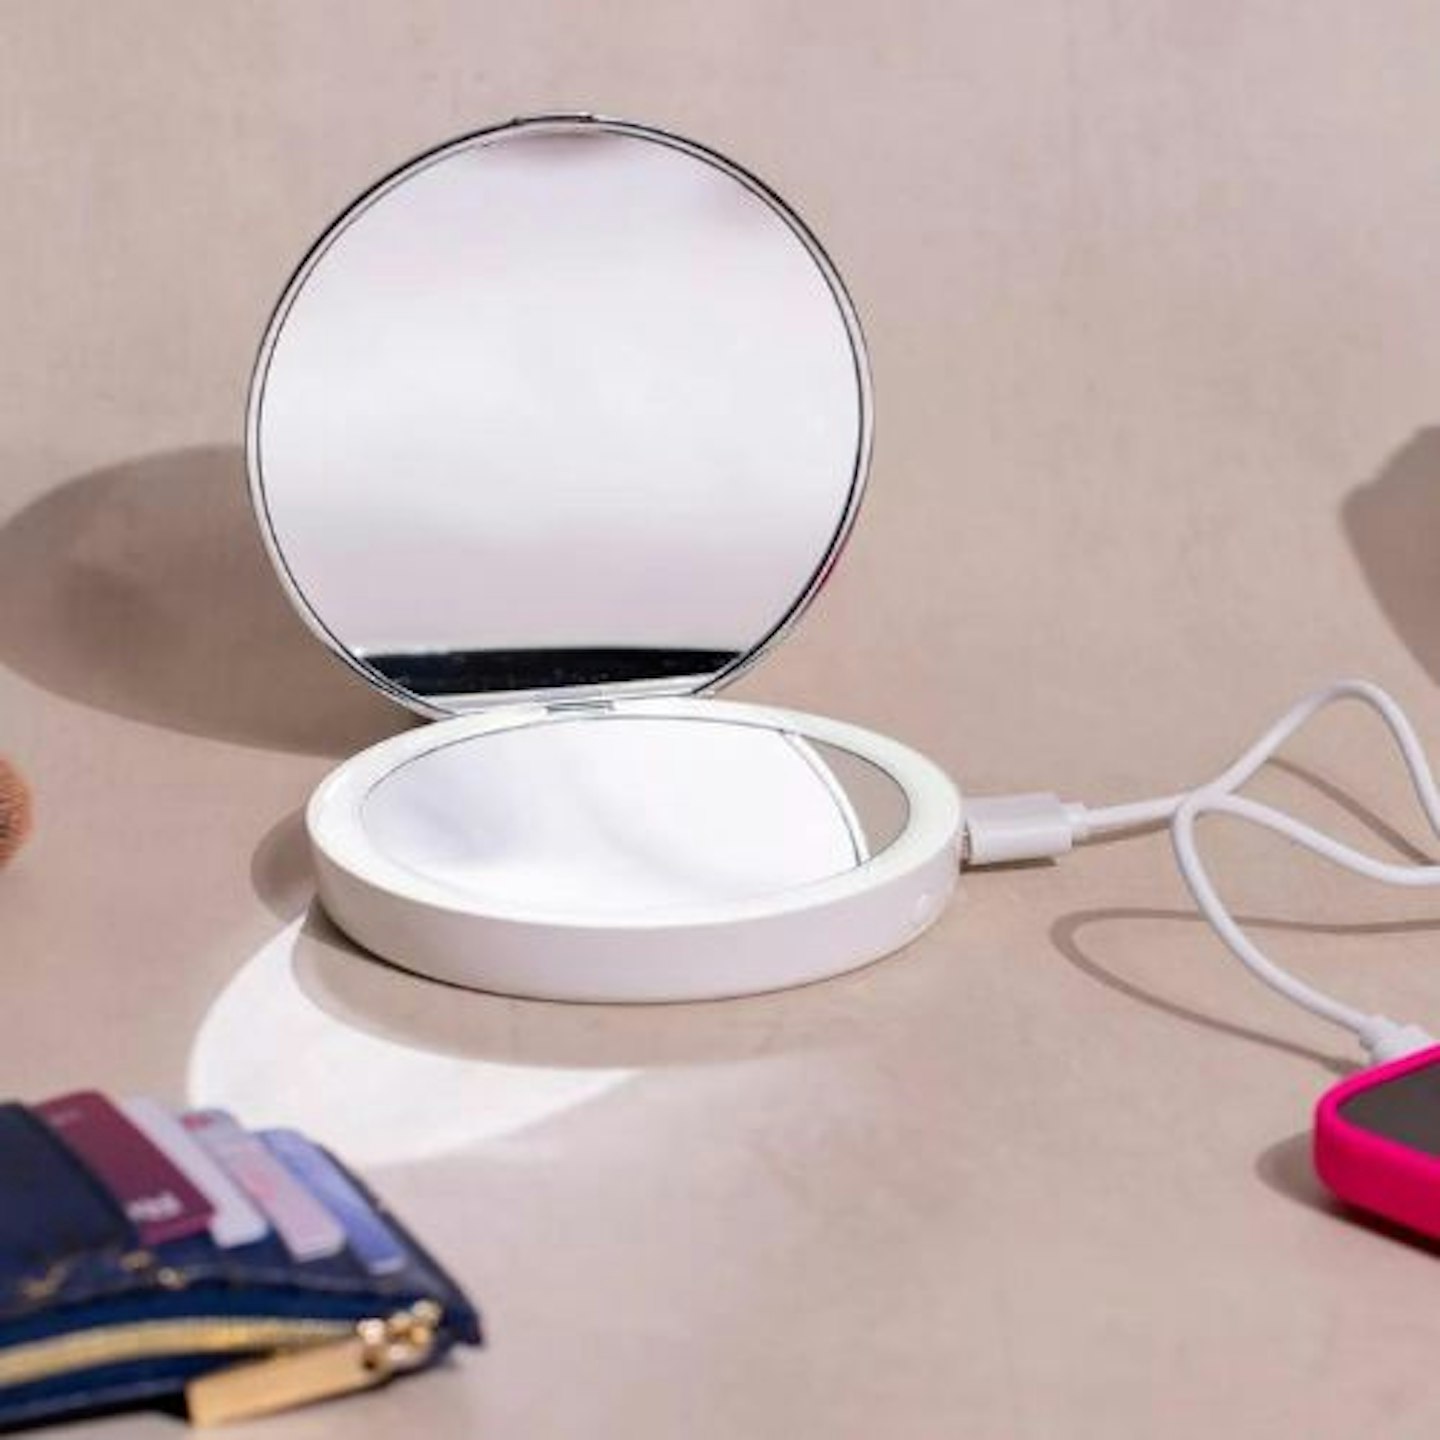 STYLPRO Flip 'N' Charge Power Bank Compact LED Mirror